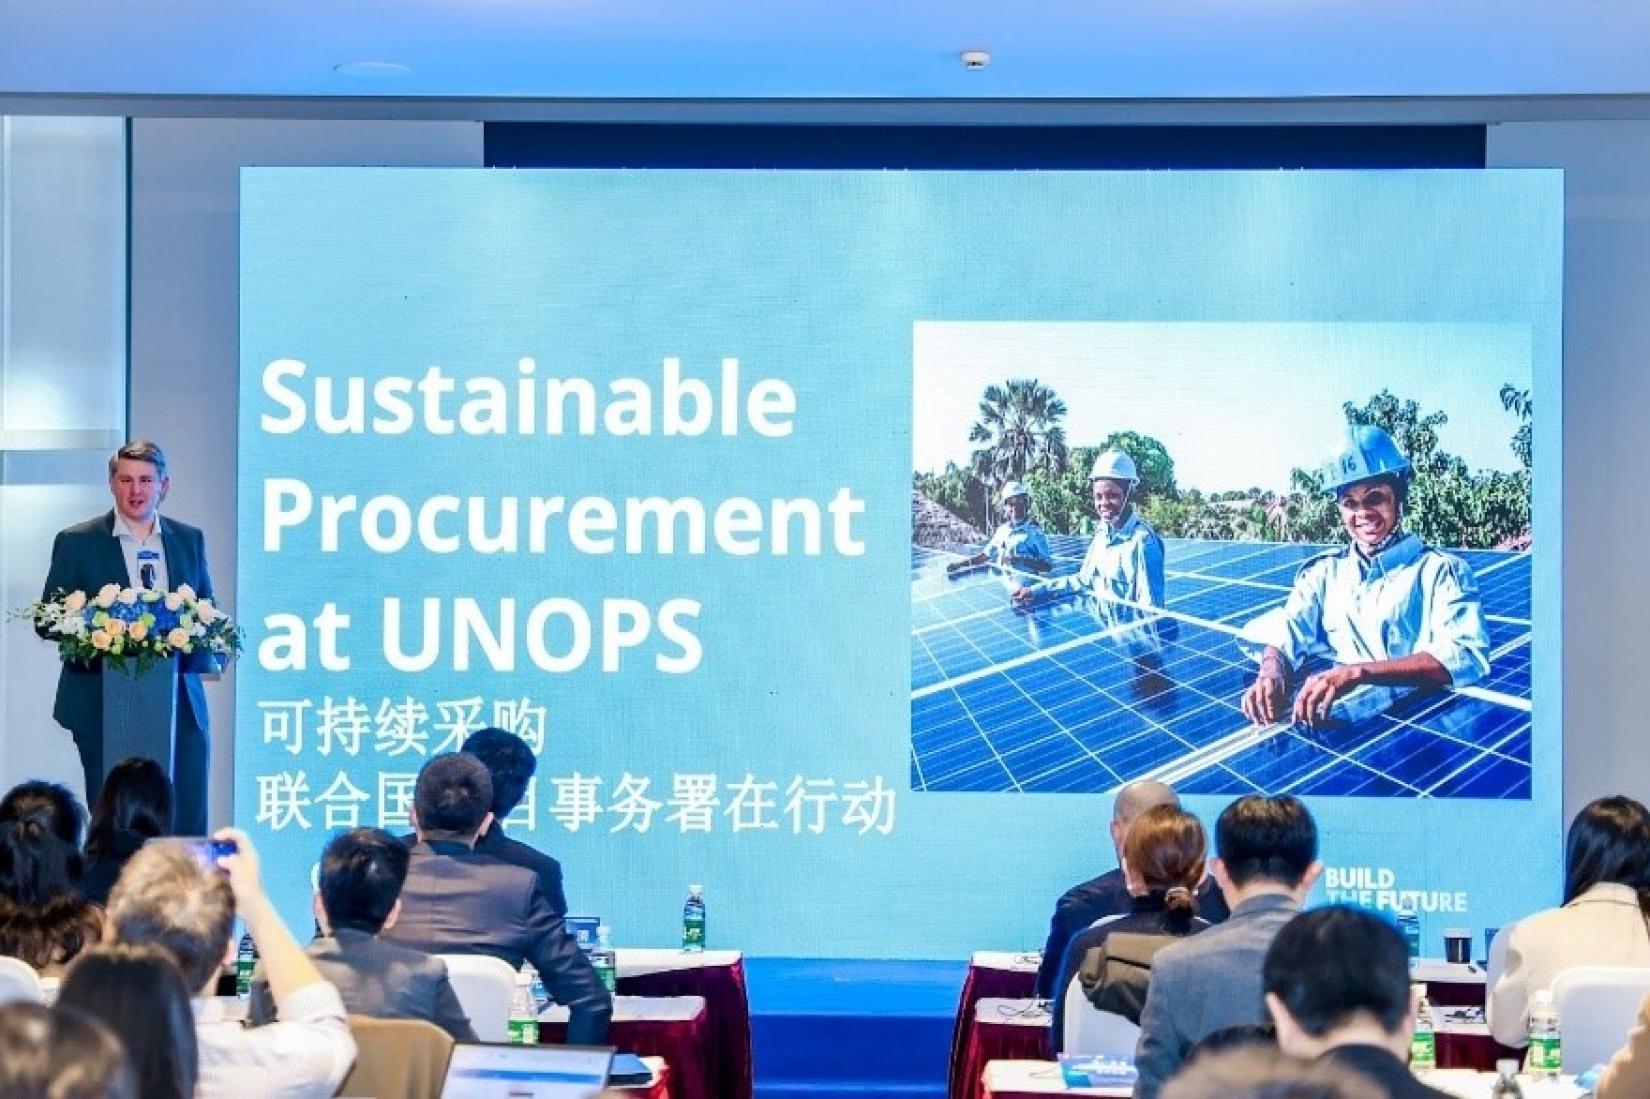 Mr. Rasmus Hansen, Officer-in-Charge of the UNOPS Sustainable Supply Chains Team, introduced sustainable procurement at UNOPS and the DRiVE program